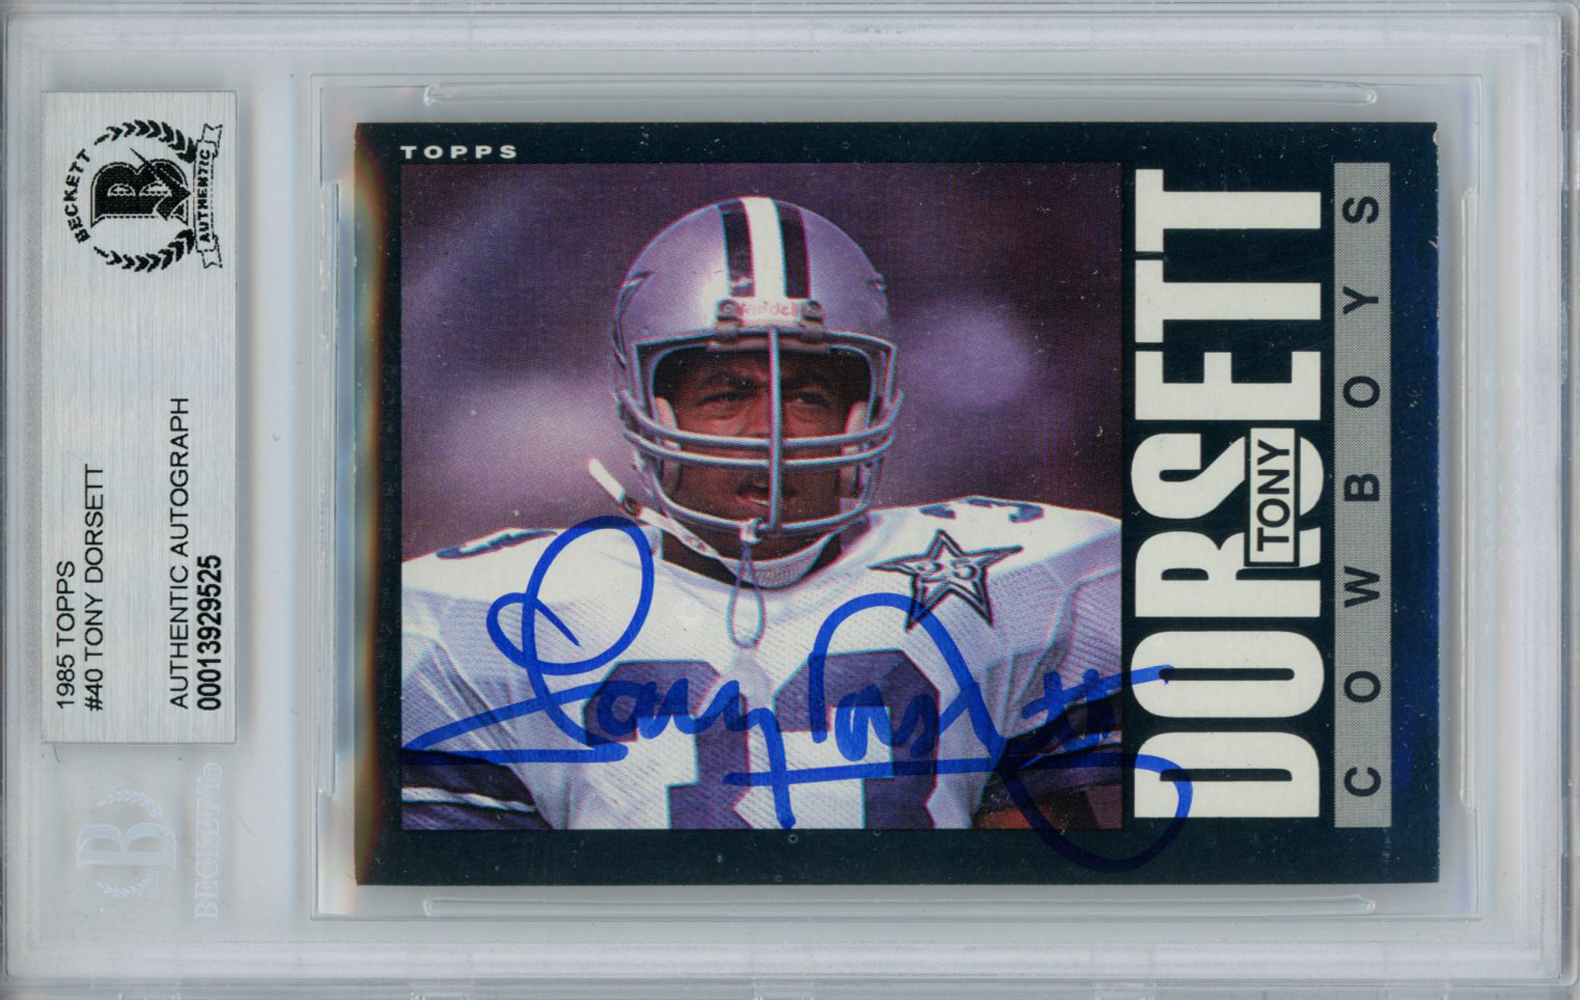 Gil Brandt Autographed Signed Trading Card Autographed Dallas Cowboys HOF 2019 